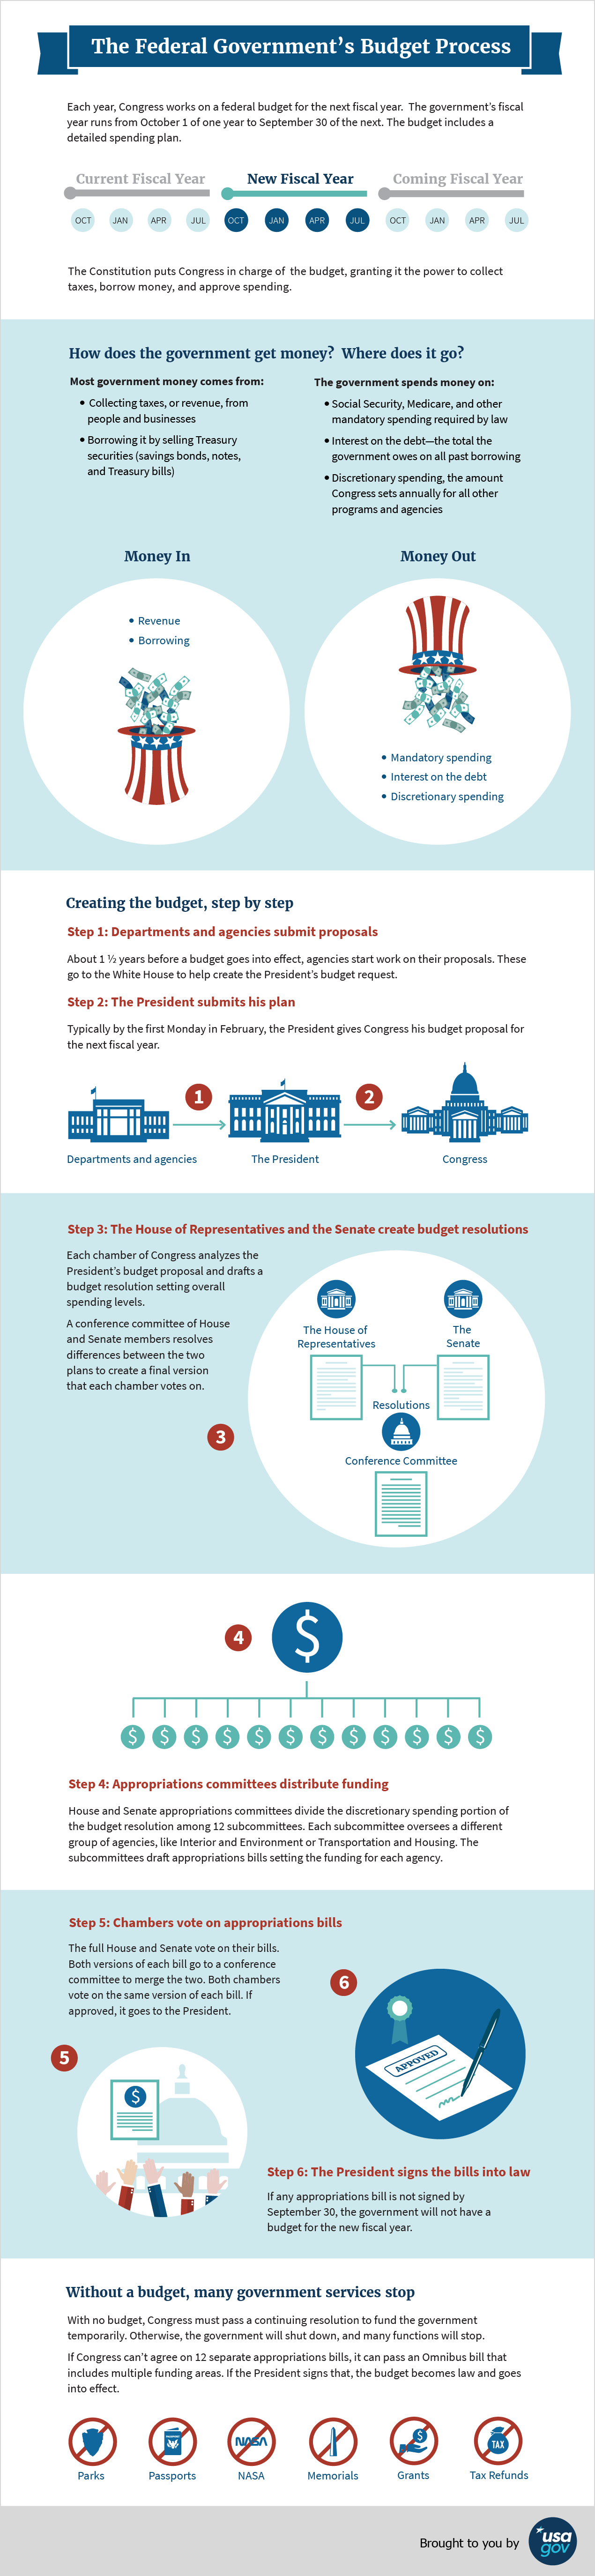 Infographic explaining the steps involved in creating an annual budget for the federal government.